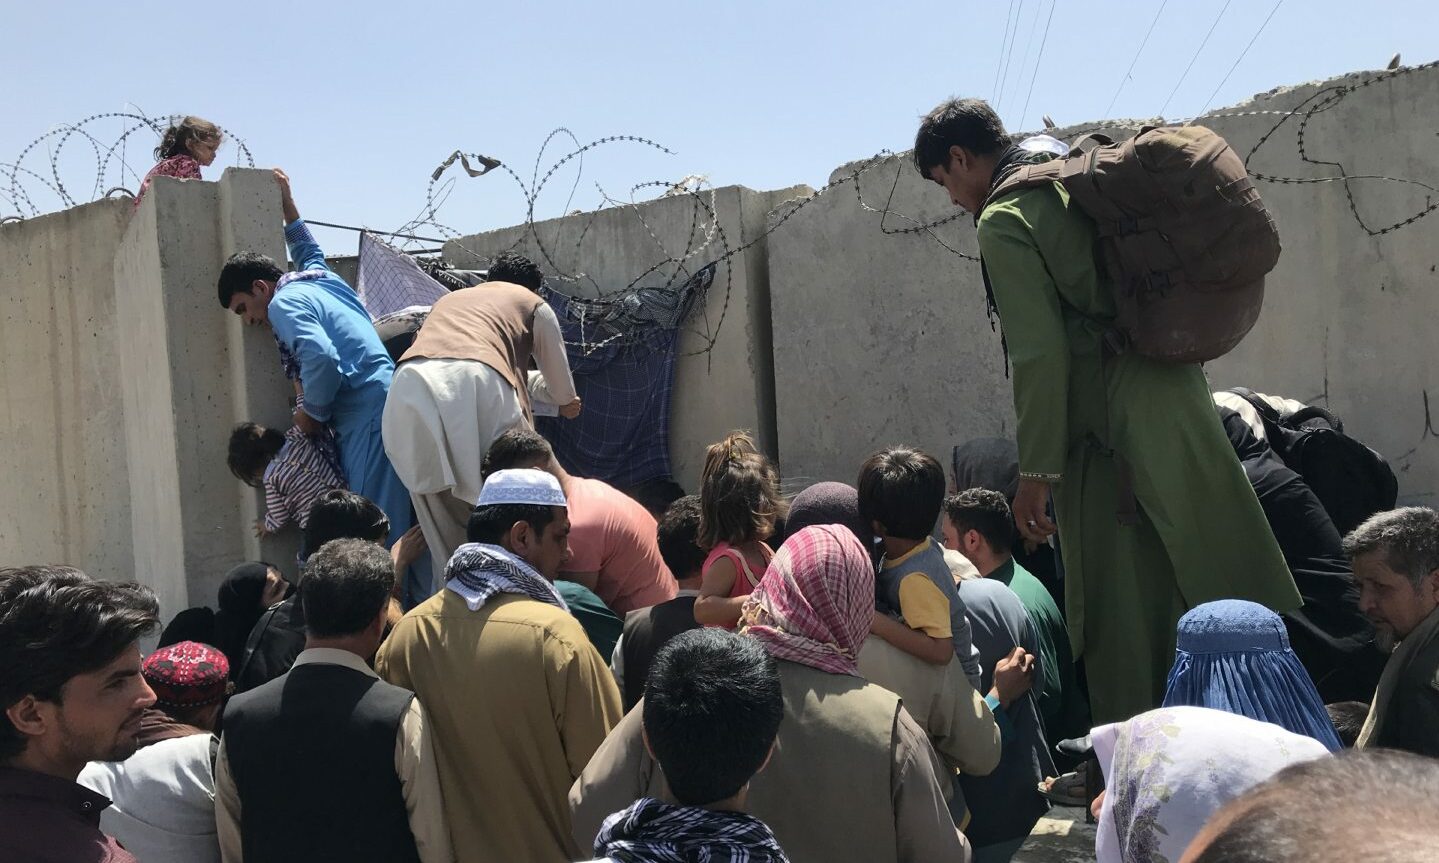 Afghans trying to climb over walls